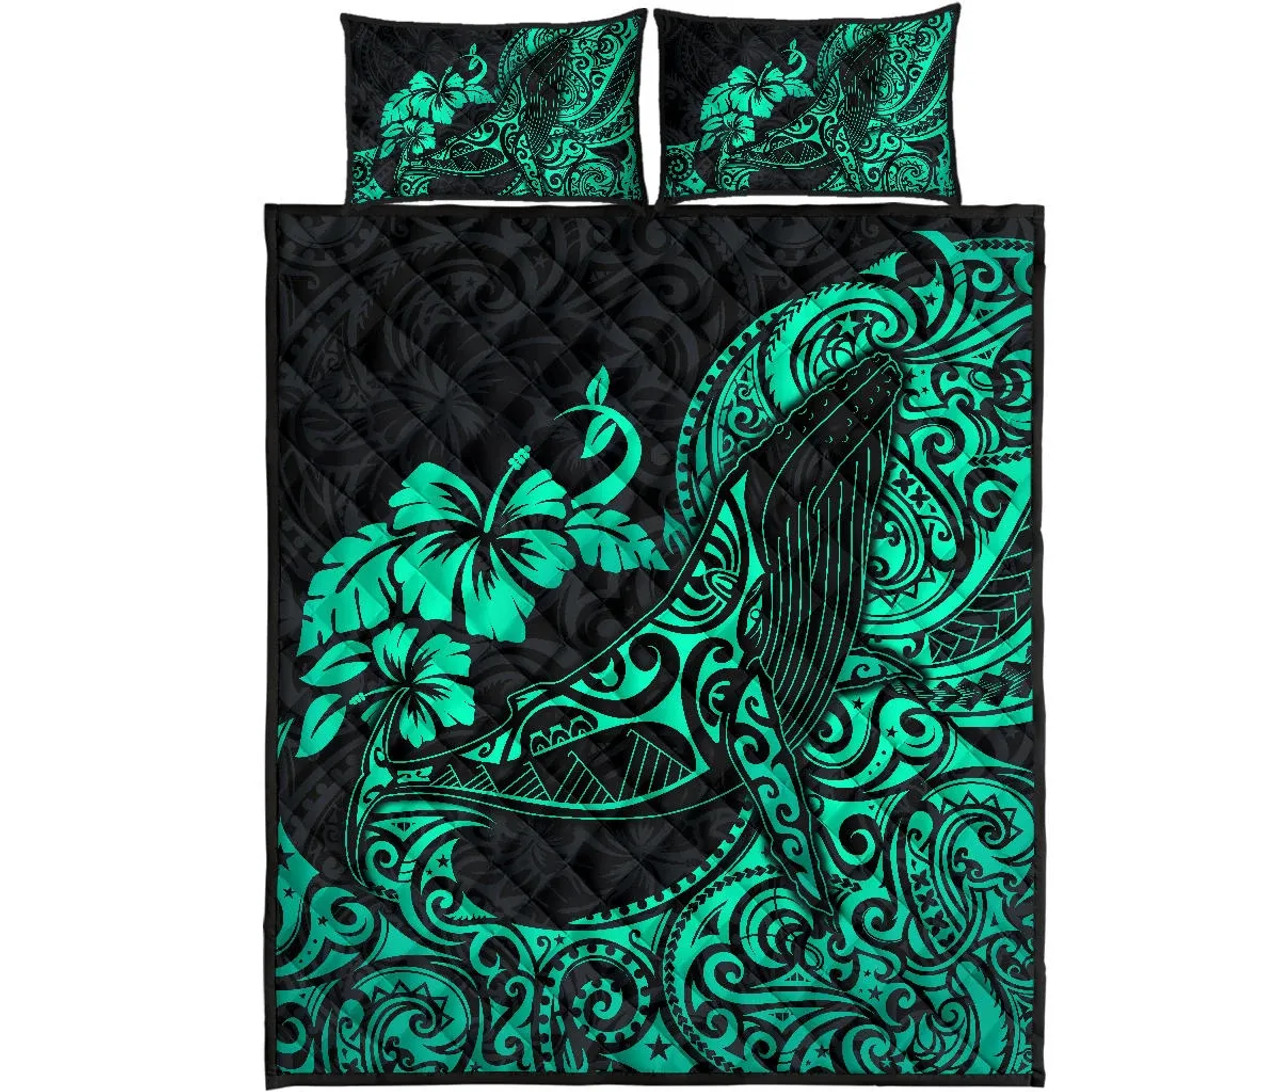 Polynesian Hawaii Quilt Bed Set - Polynesian Turquoise Humpback Whale